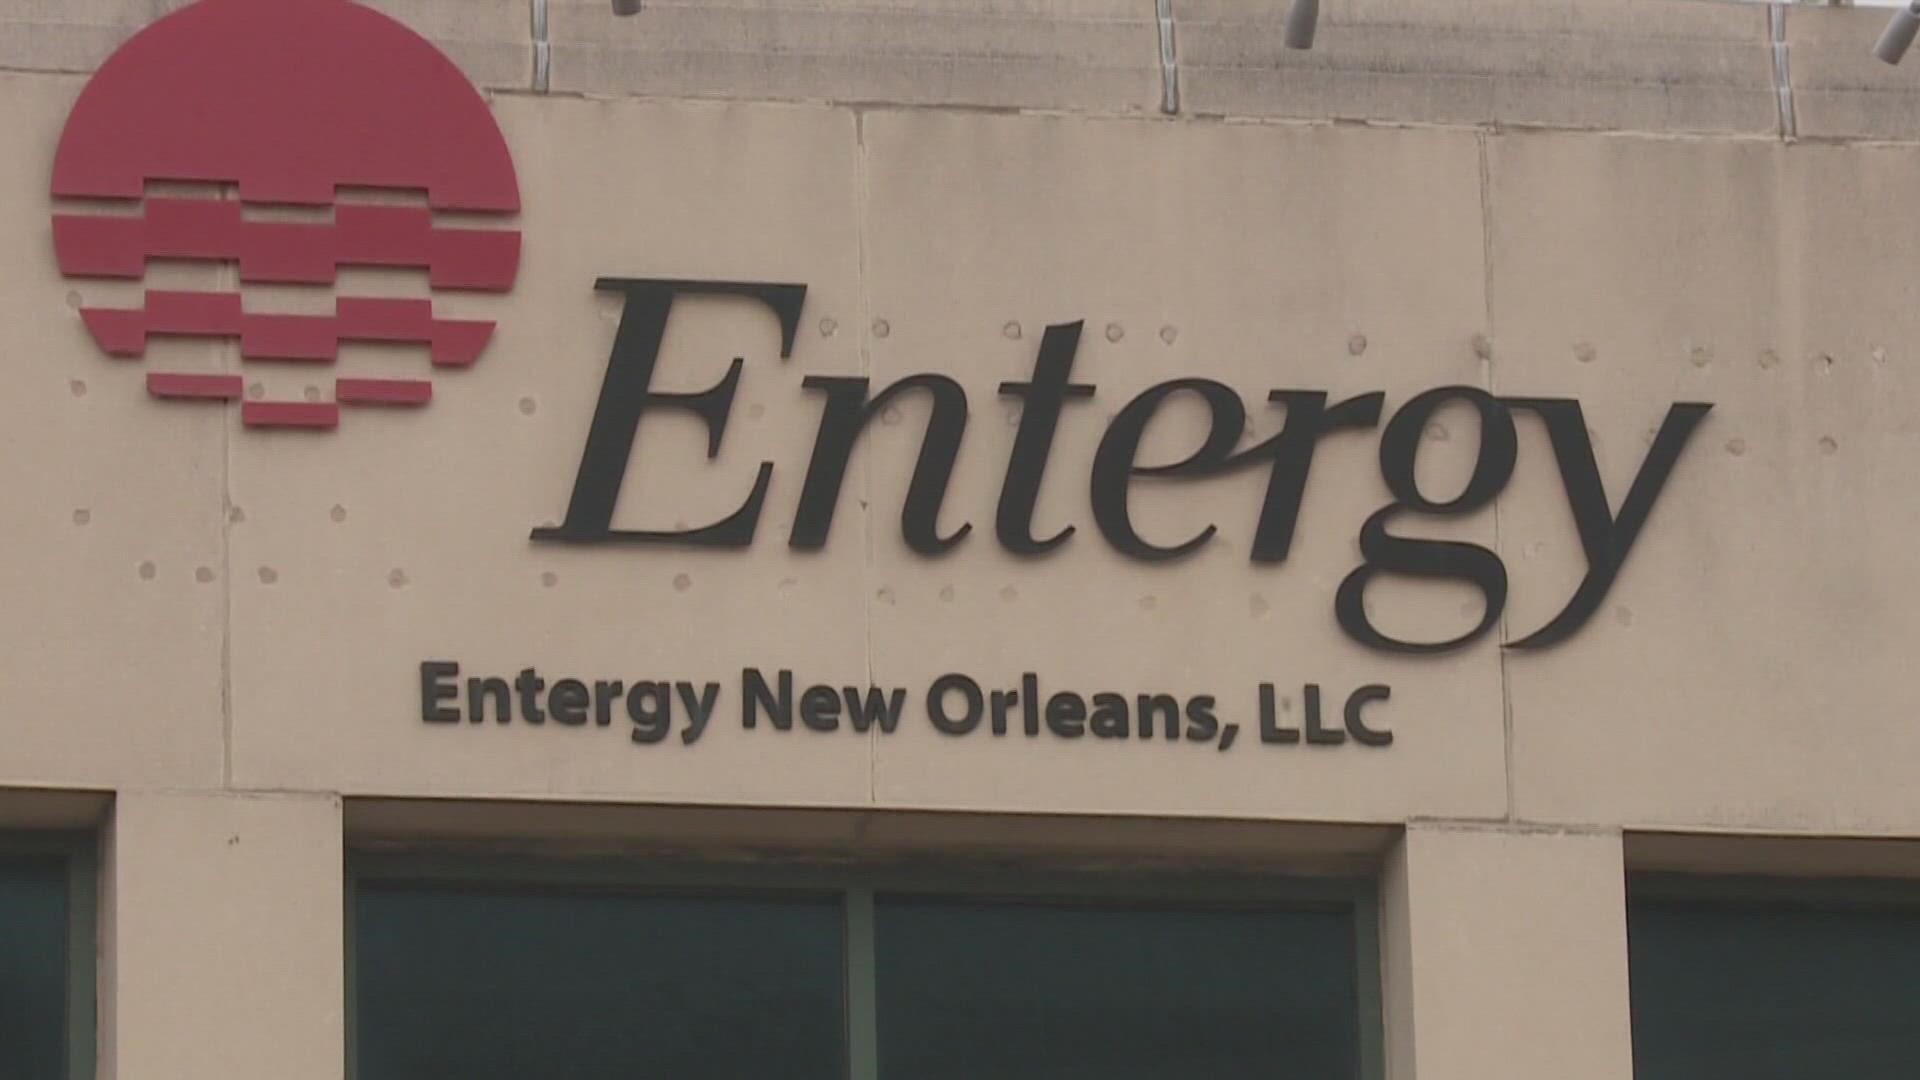 Entergy cited a need for the plant to refuel as the reason for the closure.